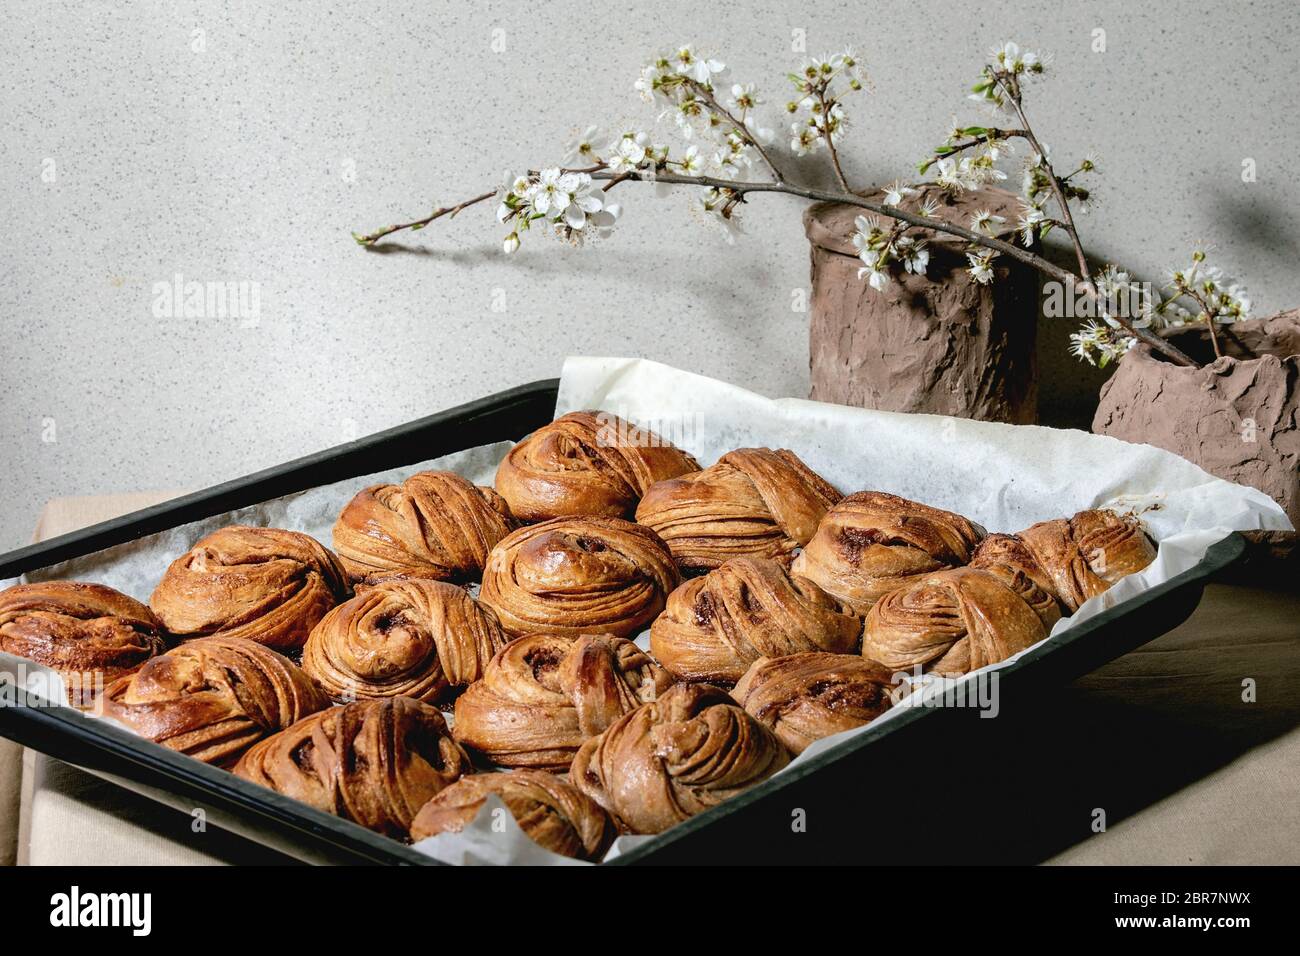 Fresh baked traditional Swedish cinnamon sweet buns Kanelbulle on oven tray cover by baking paper on beige linen table cloth. Blossom branches behind Stock Photo